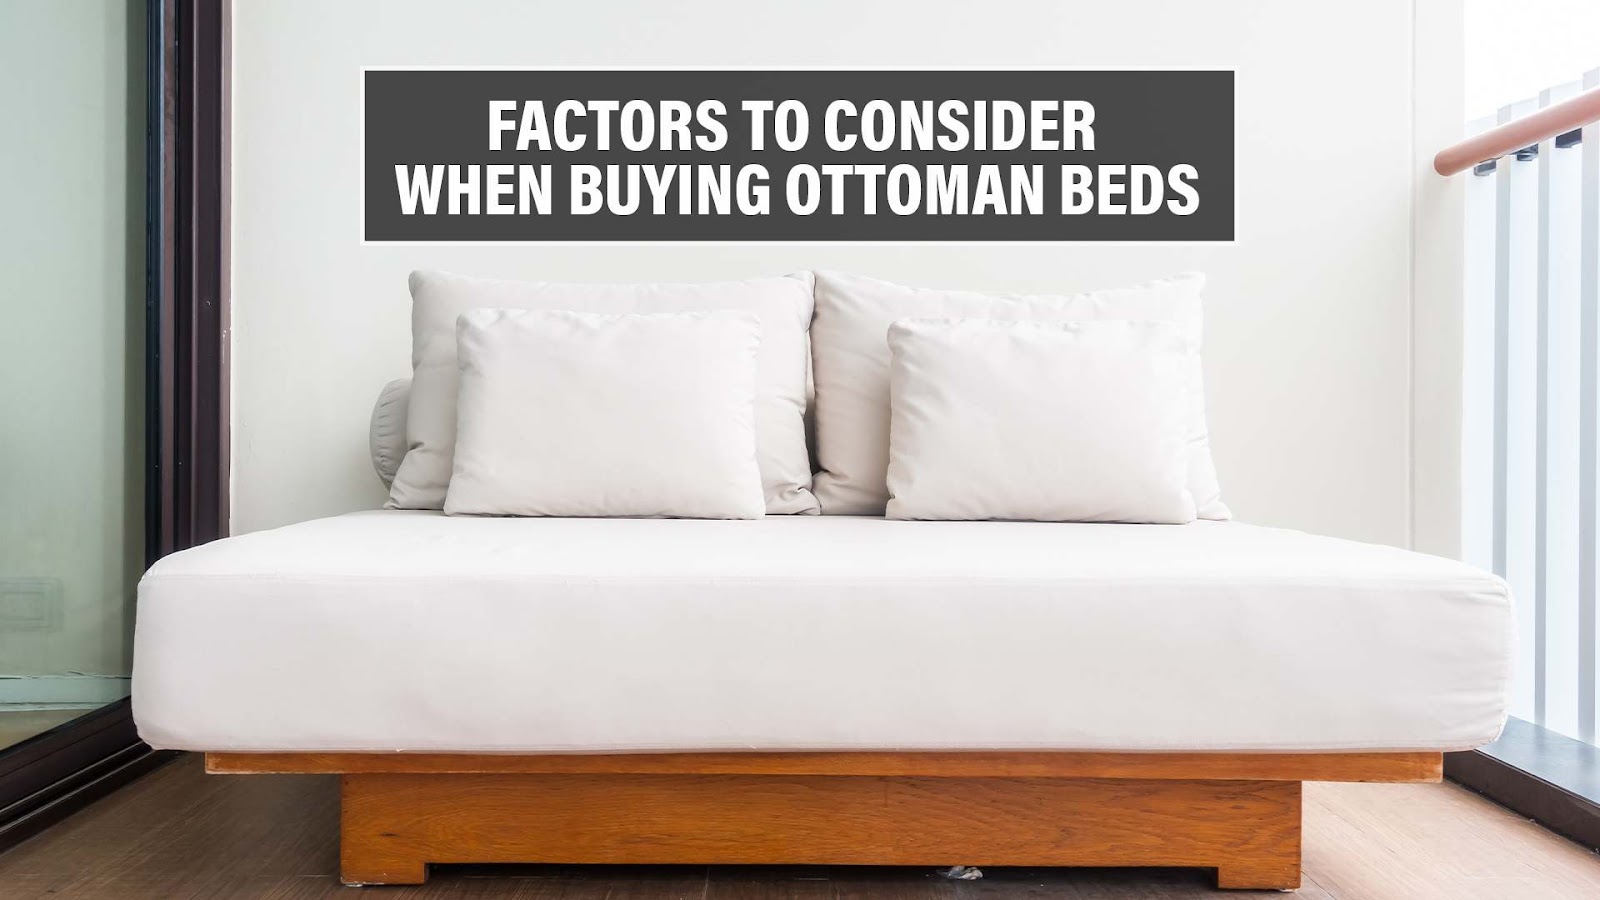 Factors to Consider When Buying Ottoman Beds